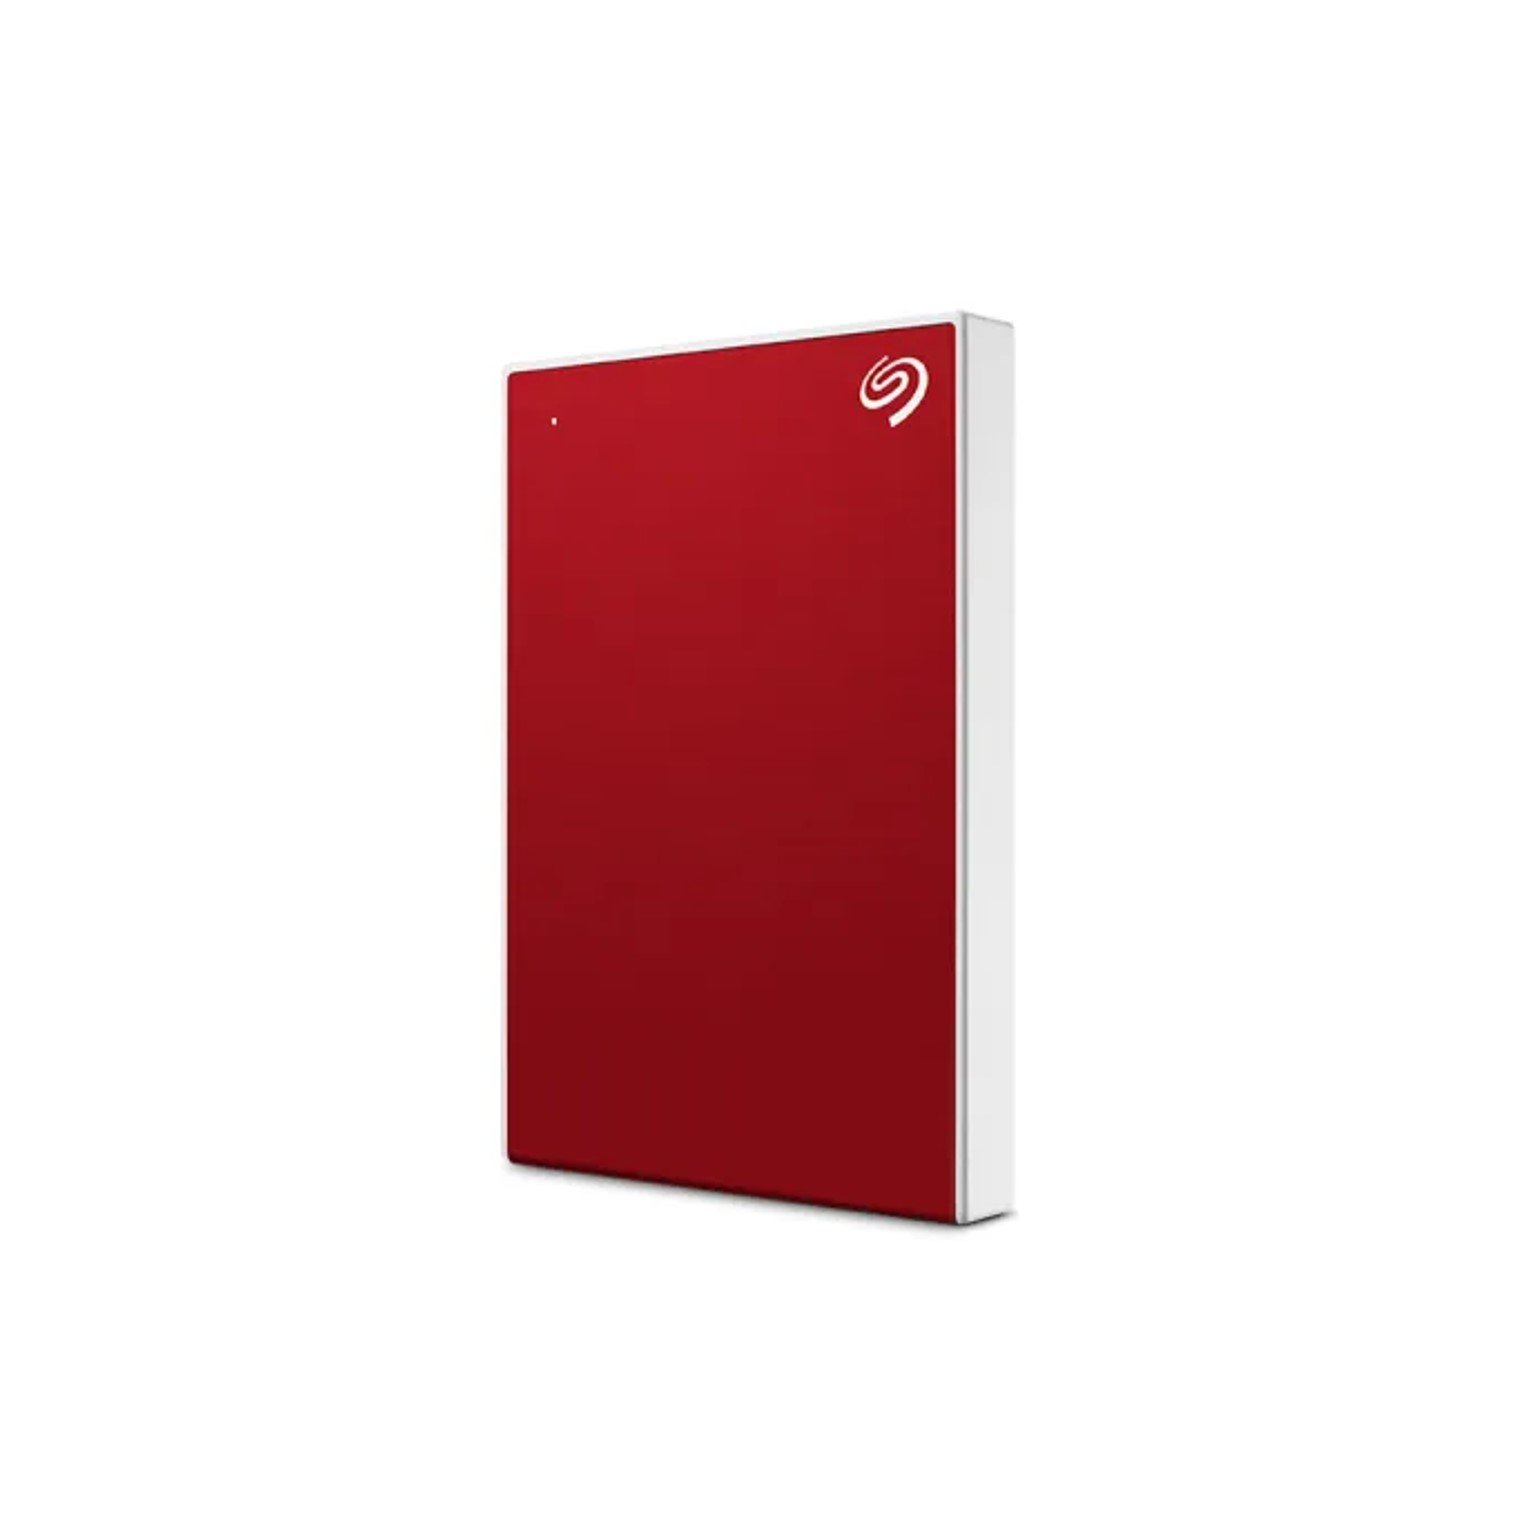 Seagate One Touch HDD with Password  NEW 5TB - USB3.0 - Red